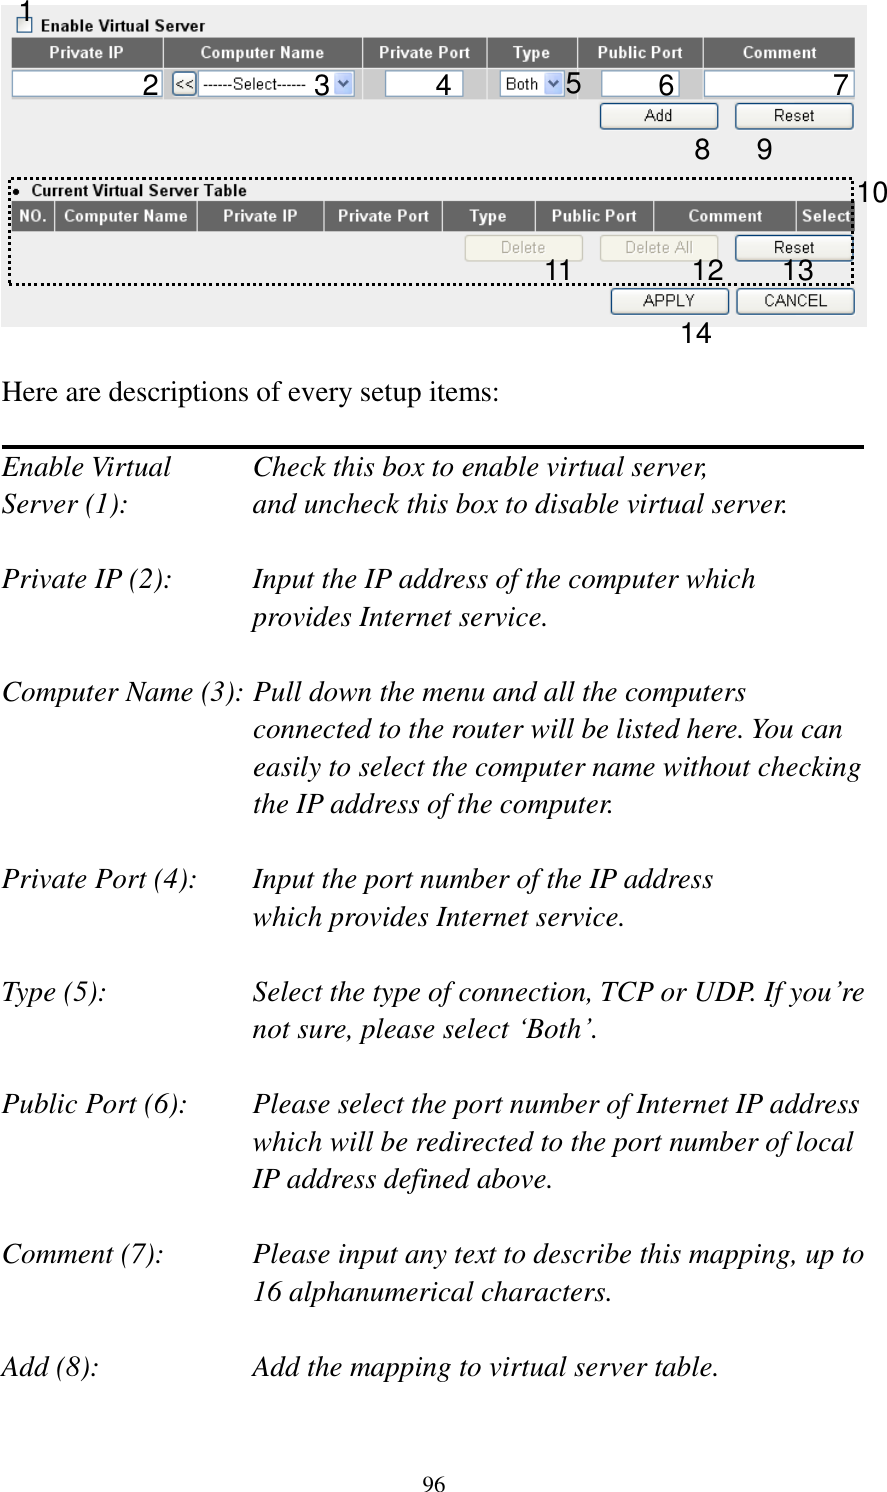 96   Here are descriptions of every setup items:  Enable Virtual      Check this box to enable virtual server, Server (1):       and uncheck this box to disable virtual server.  Private IP (2):      Input the IP address of the computer which           provides Internet service.  Computer Name (3): Pull down the menu and all the computers connected to the router will be listed here. You can easily to select the computer name without checking the IP address of the computer.  Private Port (4):    Input the port number of the IP address           which provides Internet service.  Type (5):    Select the type of connection, TCP or UDP. If you‟re not sure, please select „Both‟.  Public Port (6):    Please select the port number of Internet IP address which will be redirected to the port number of local IP address defined above.  Comment (7):    Please input any text to describe this mapping, up to 16 alphanumerical characters.  Add (8):        Add the mapping to virtual server table.  1 2 3 4 5 8 9 10 11 12 13 14 7 6 